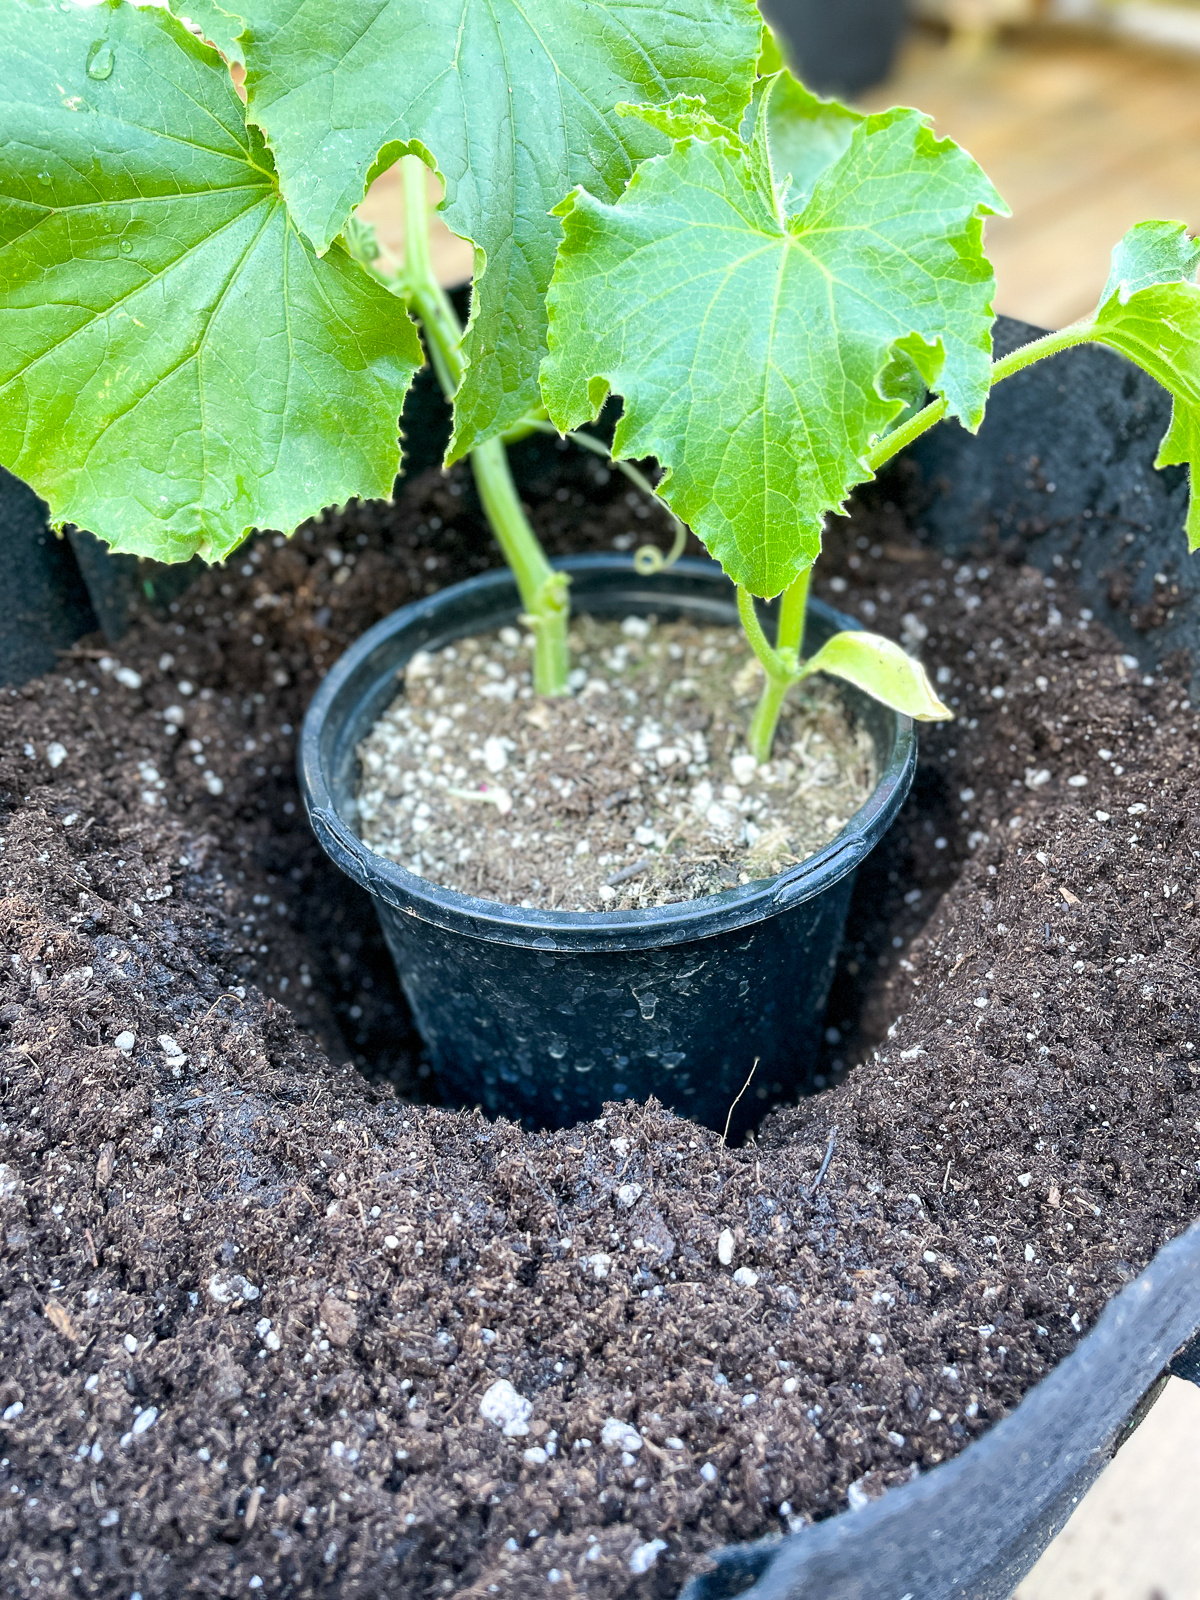 testing depth of hole in soil with the cucumber nursery pot